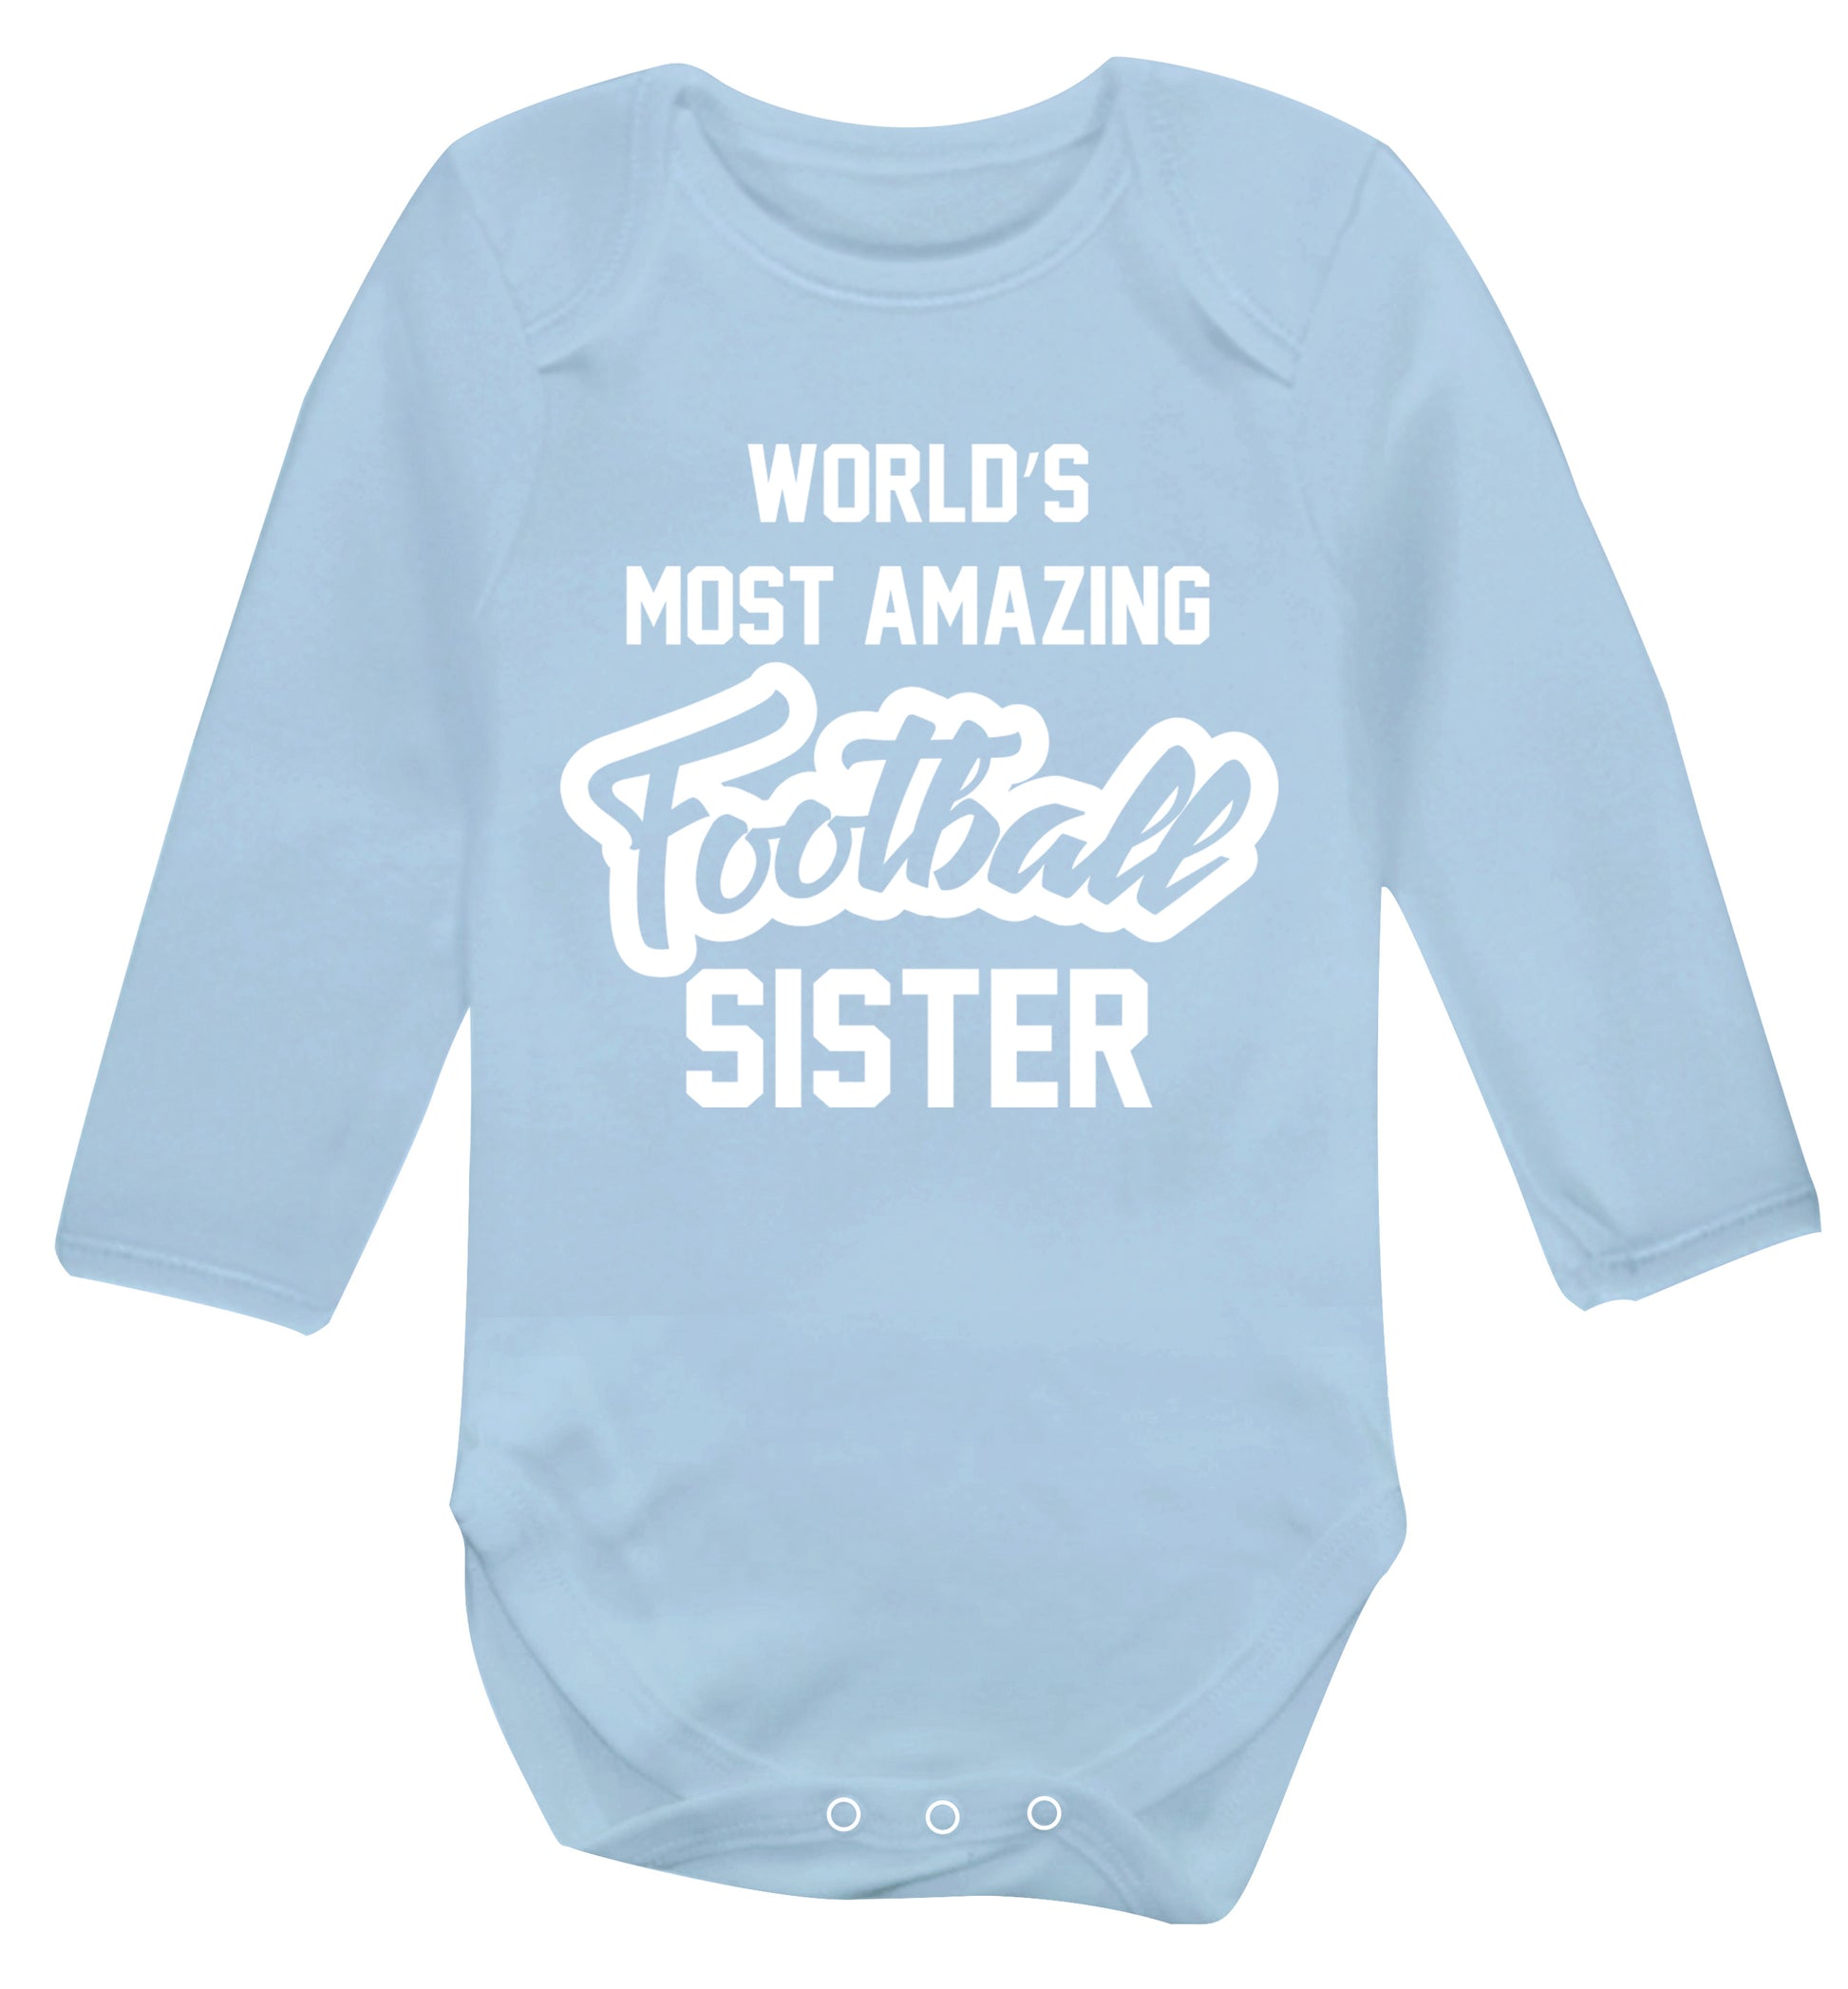 Worlds most amazing football sister Baby Vest long sleeved pale blue 6-12 months